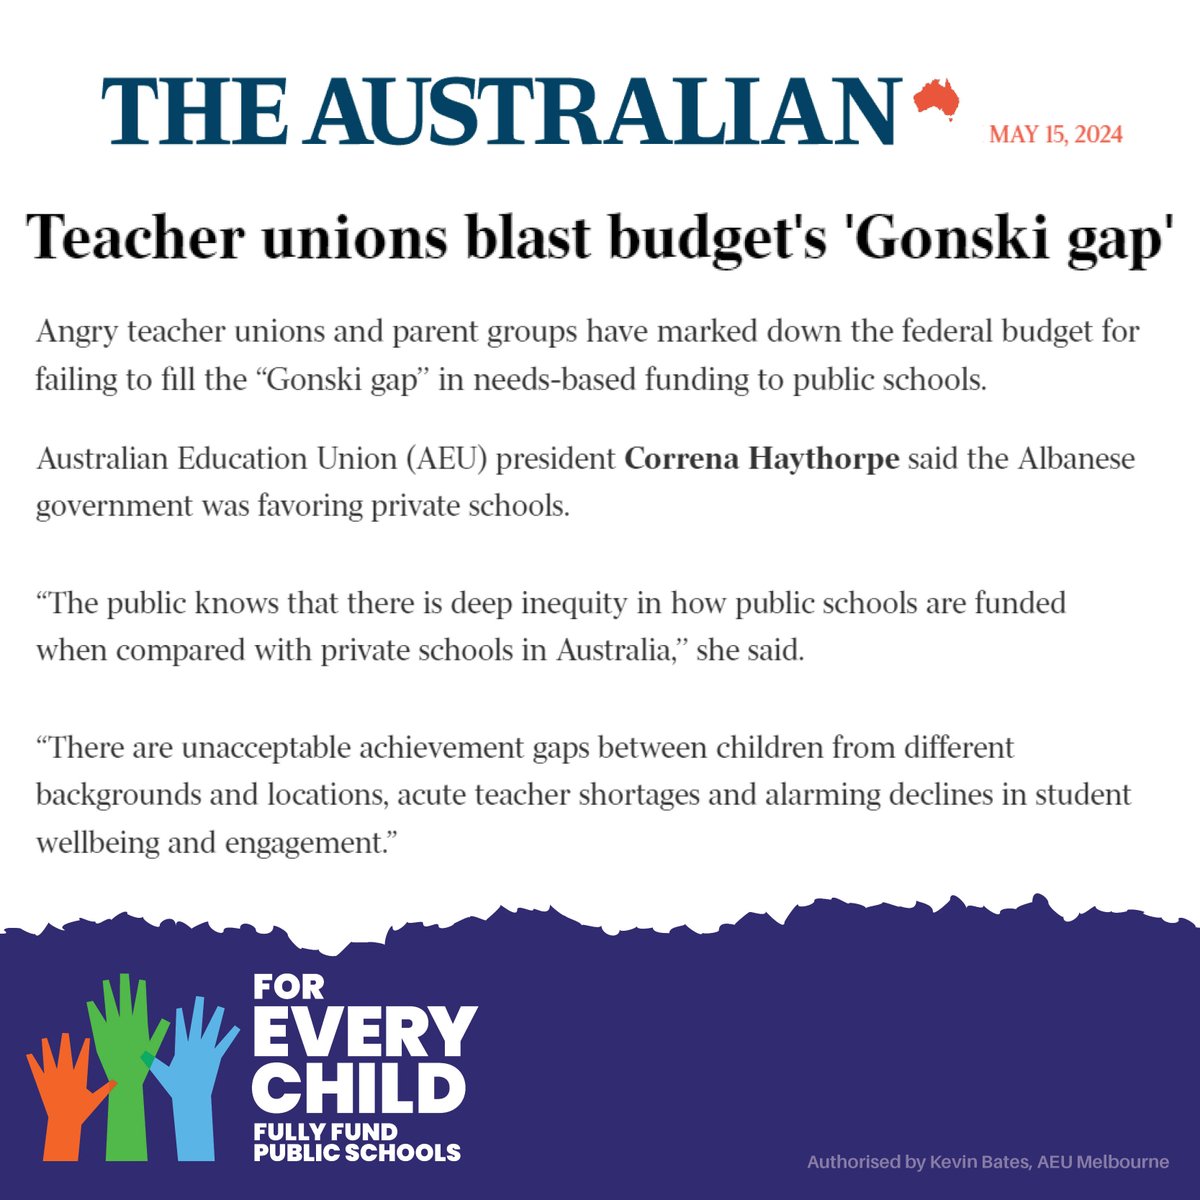 It is deeply disappointing that this year’s Federal Budget has failed to increase the Commonwealth share of school funding, despite widespread support across the nation. @AlboMP our public schools teachers and students can't wait any longer. Full funding now! #auspol